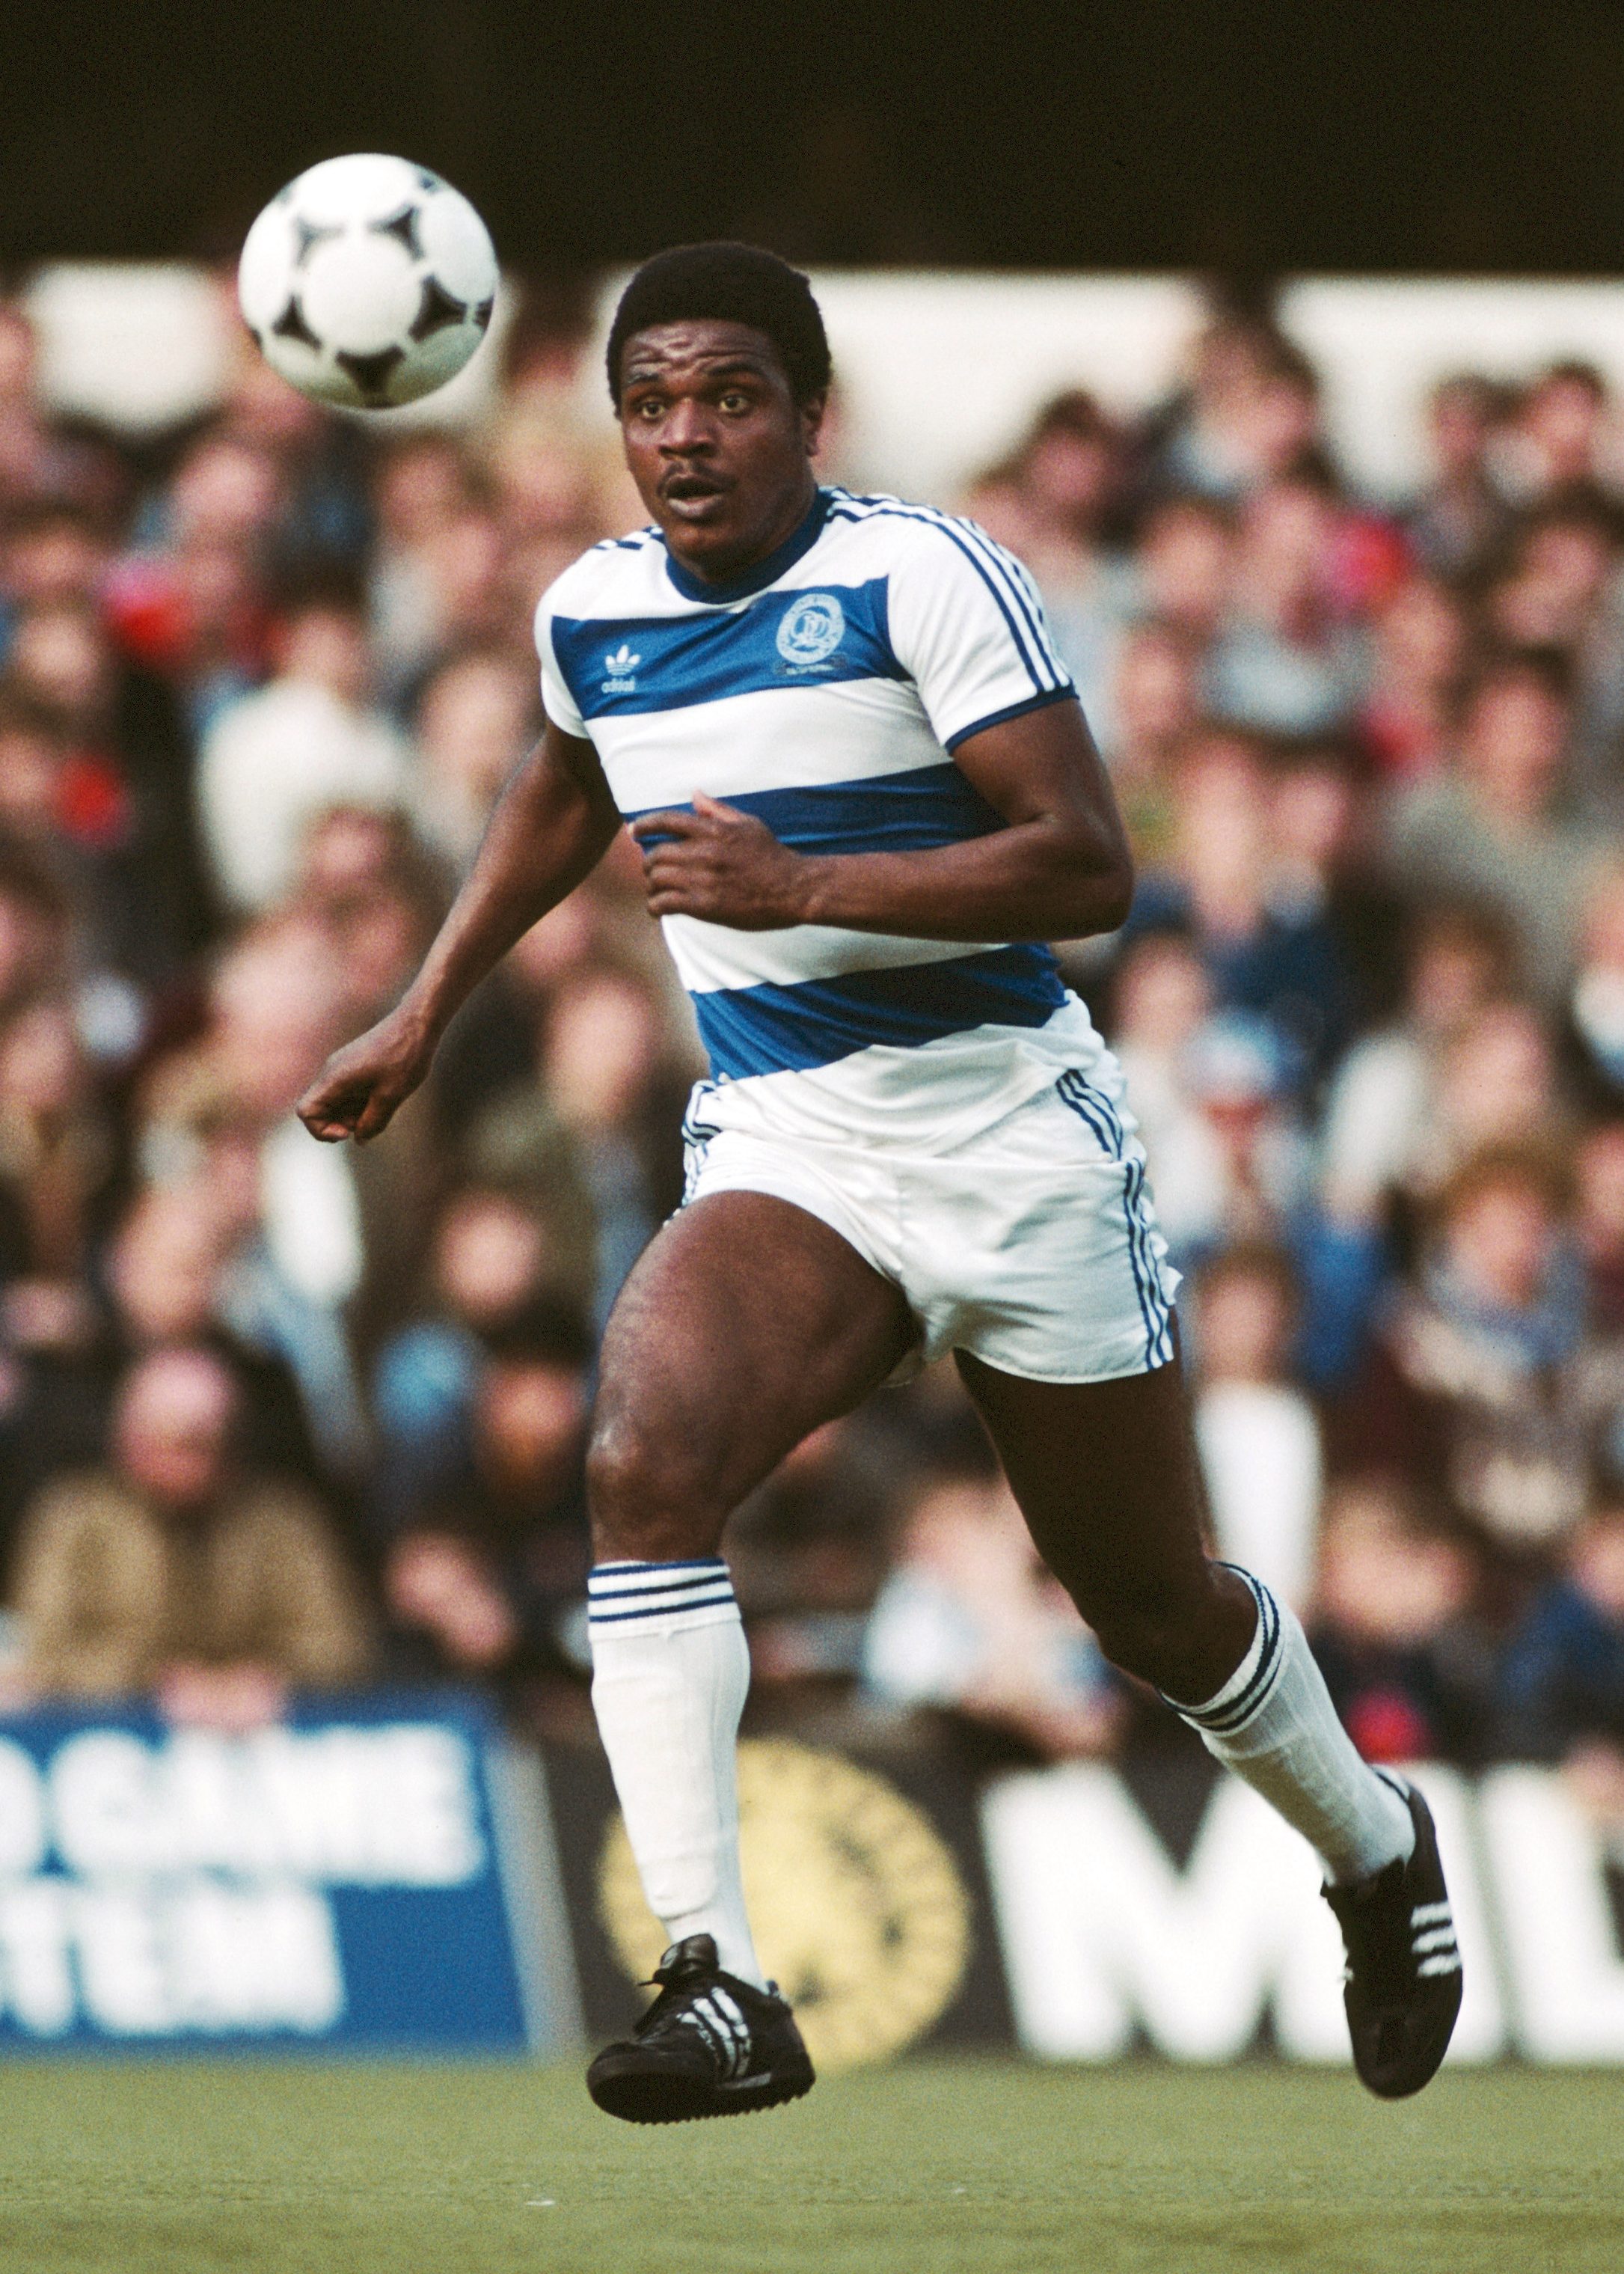 QPR were the first side to embrace synthetic turf in 1981